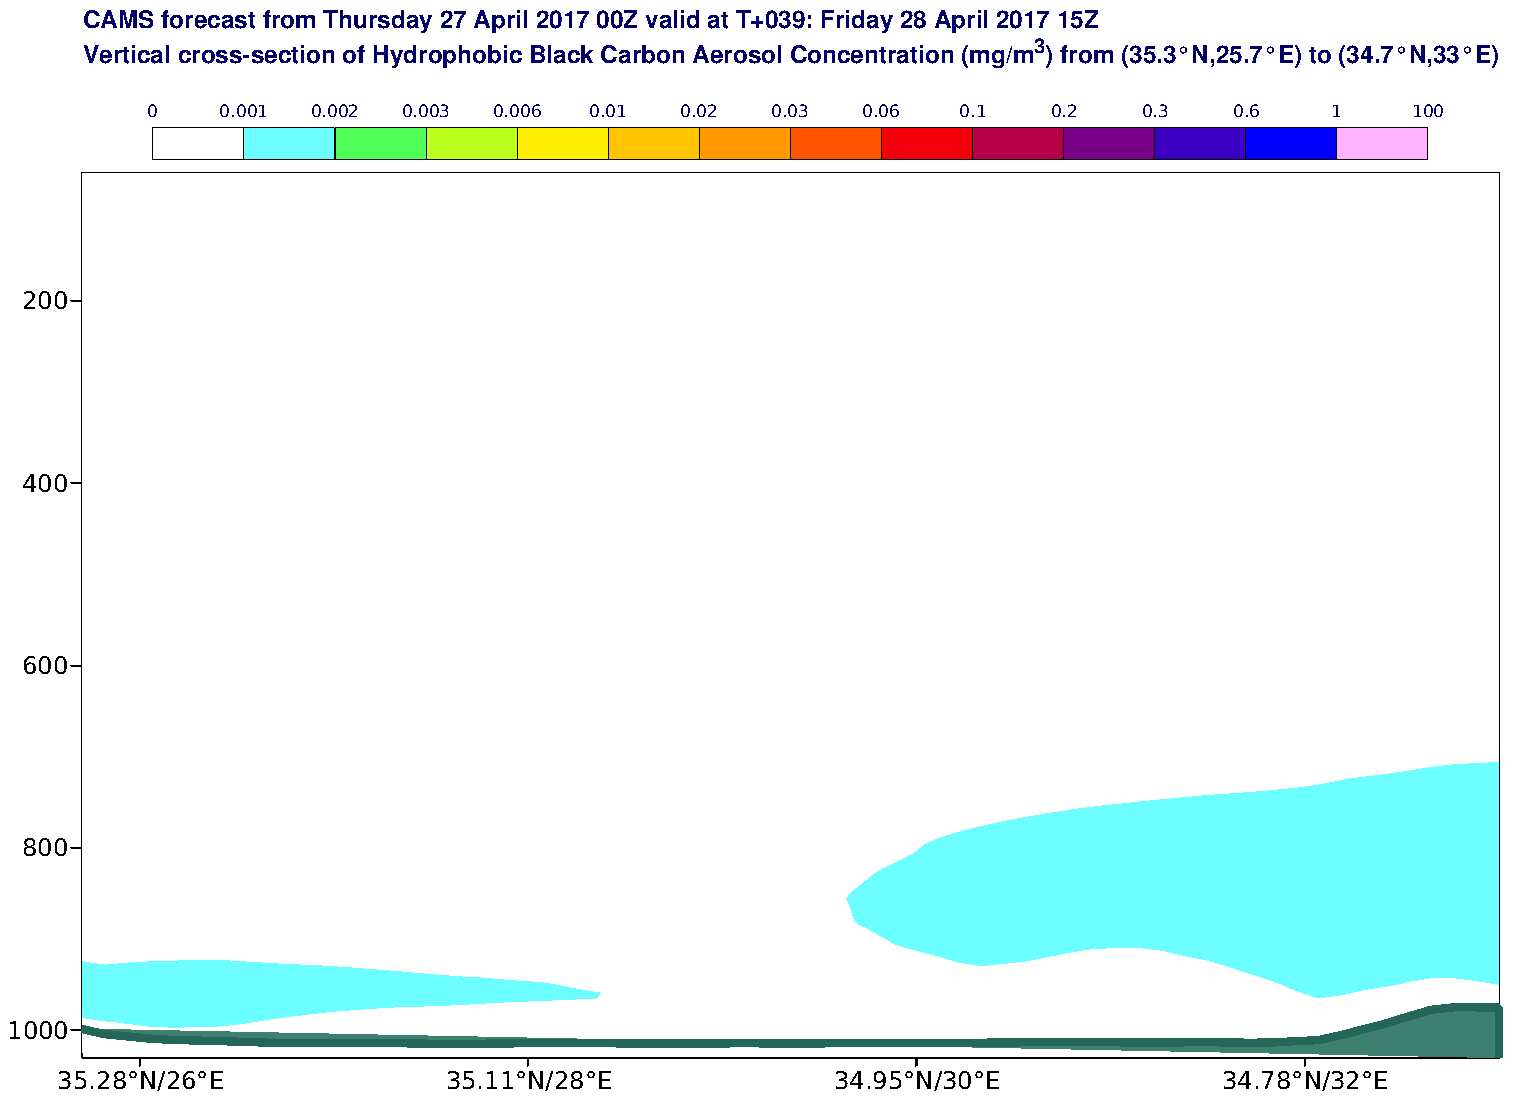 Vertical cross-section of Hydrophobic Black Carbon Aerosol Concentration (mg/m3) valid at T39 - 2017-04-28 15:00